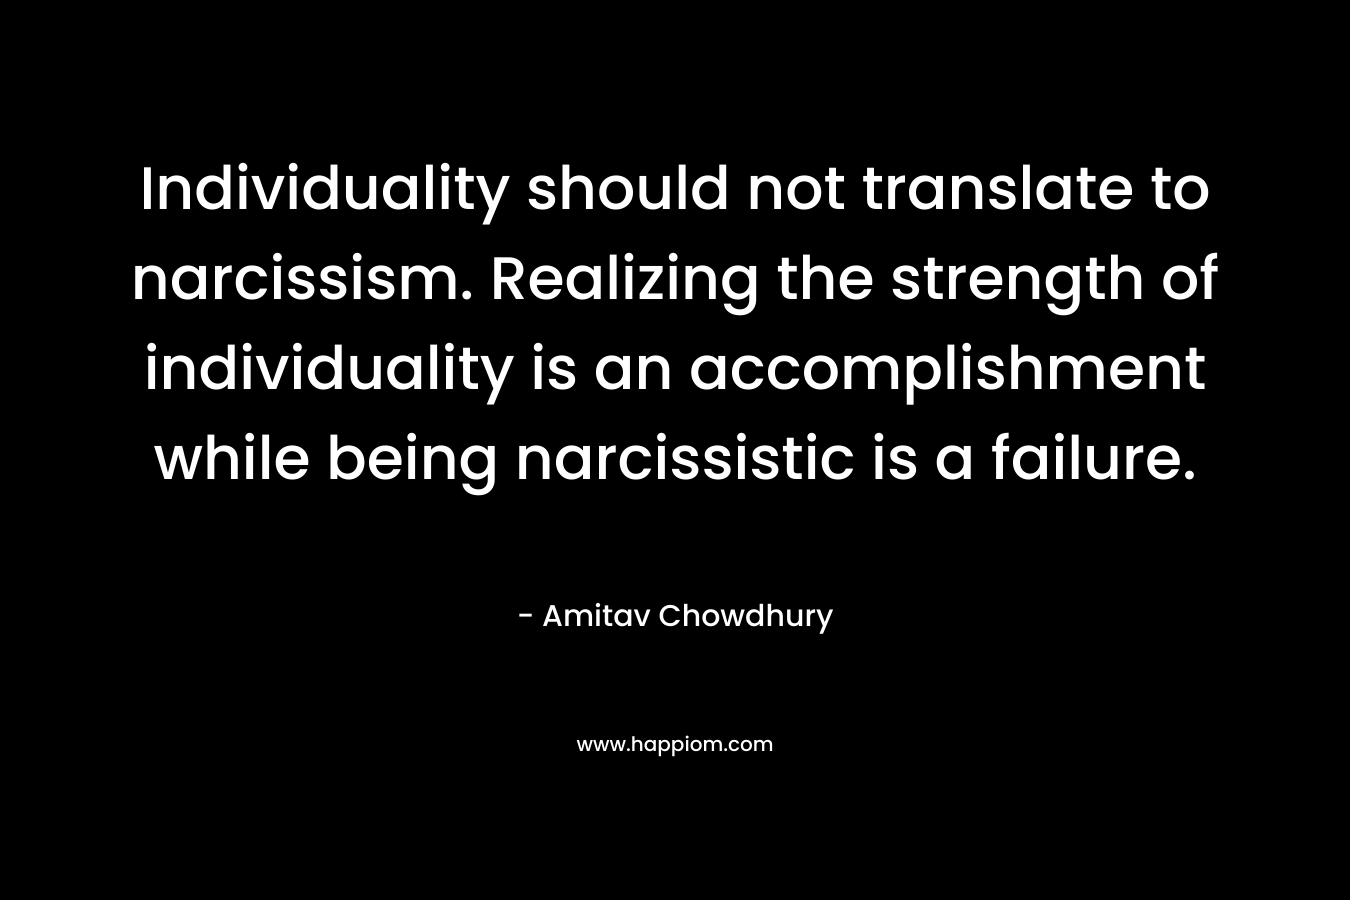 Individuality should not translate to narcissism. Realizing the strength of individuality is an accomplishment while being narcissistic is a failure. – Amitav Chowdhury